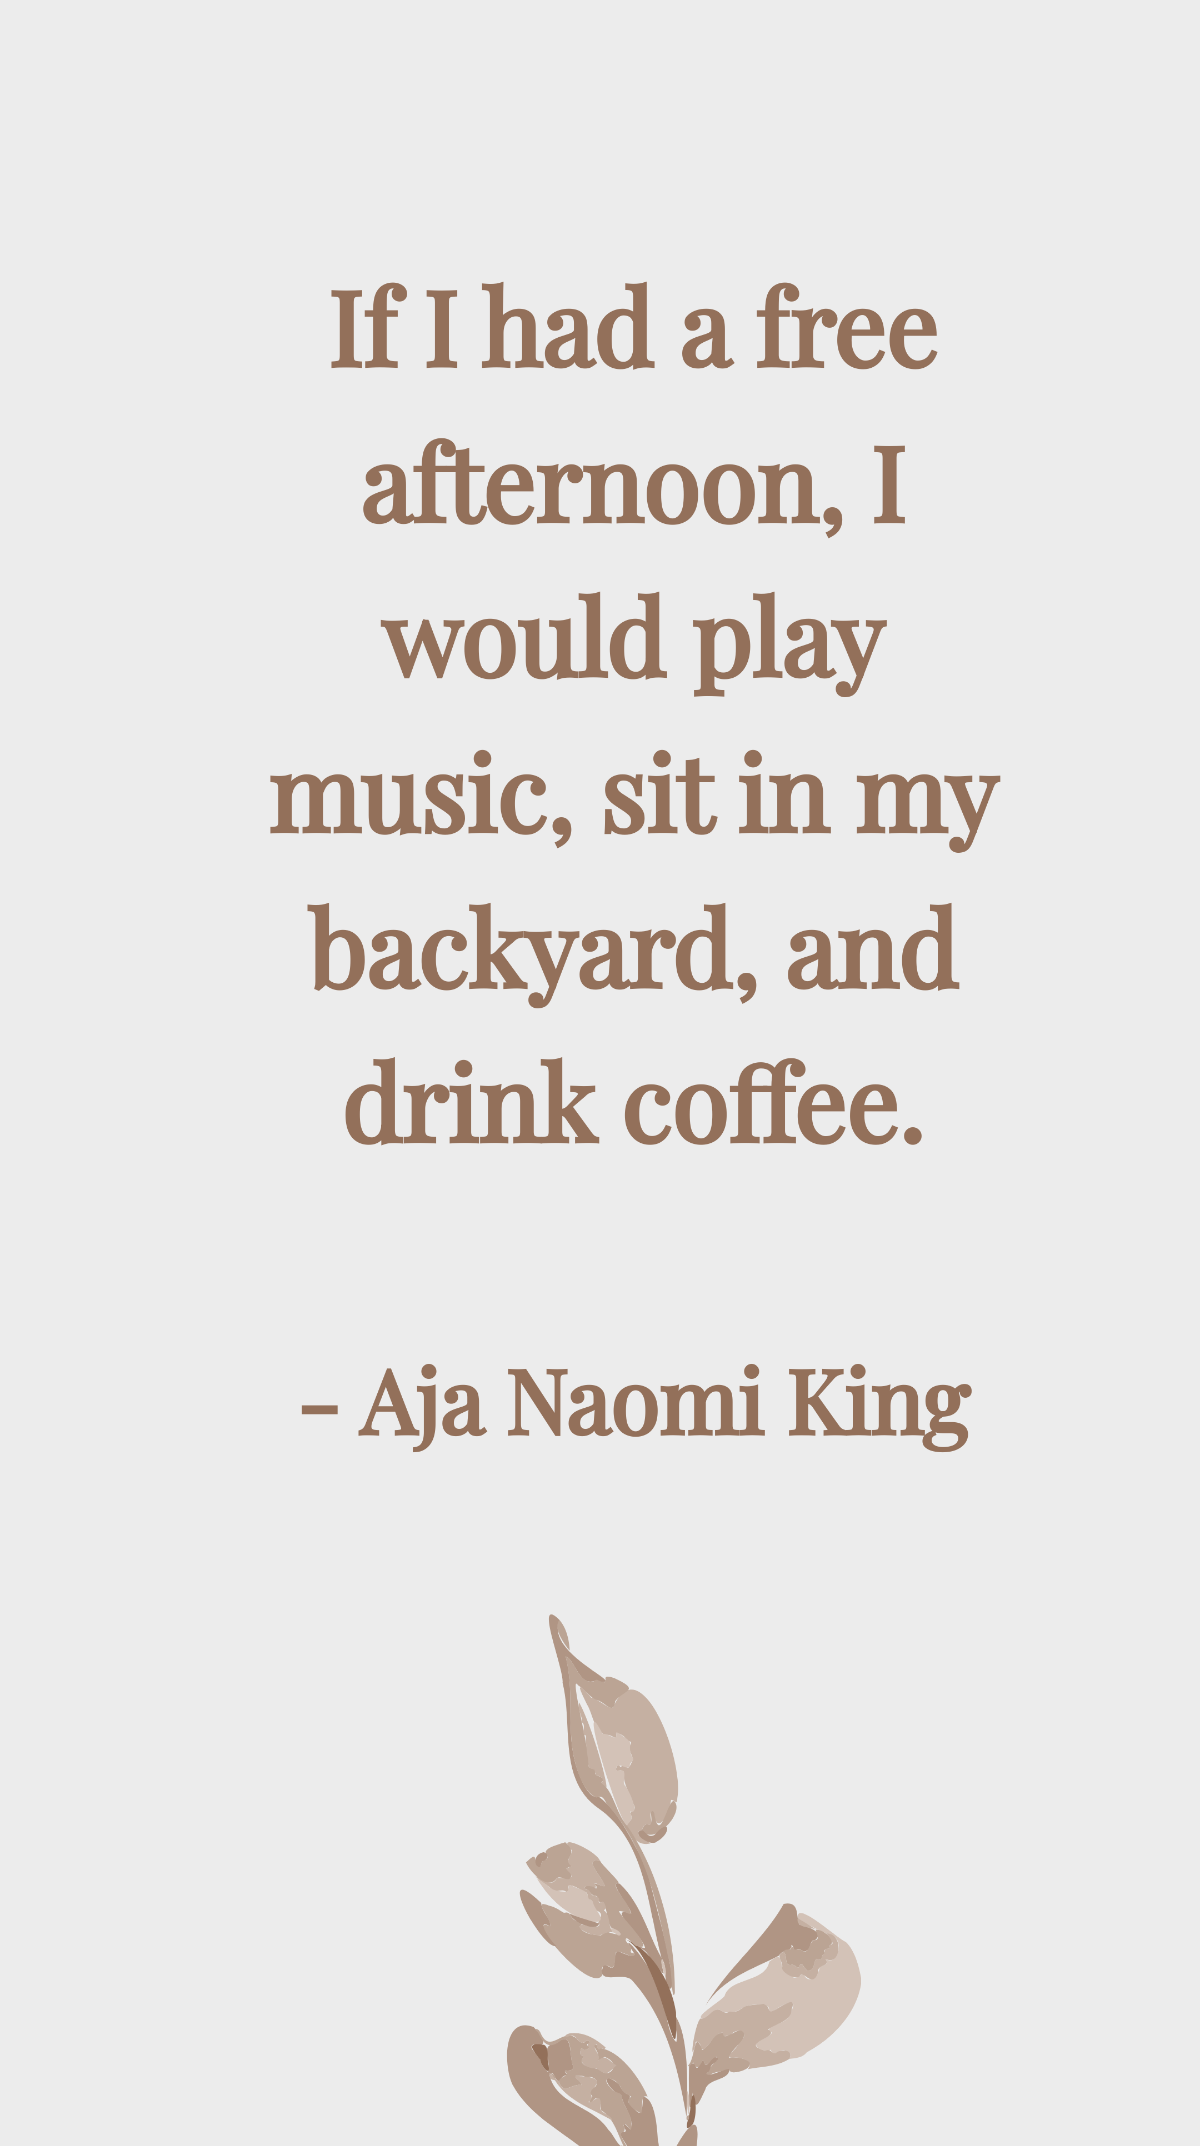 Aja Naomi King - If I had a afternoon, I would play music, sit in my backyard, and drink coffee. Template